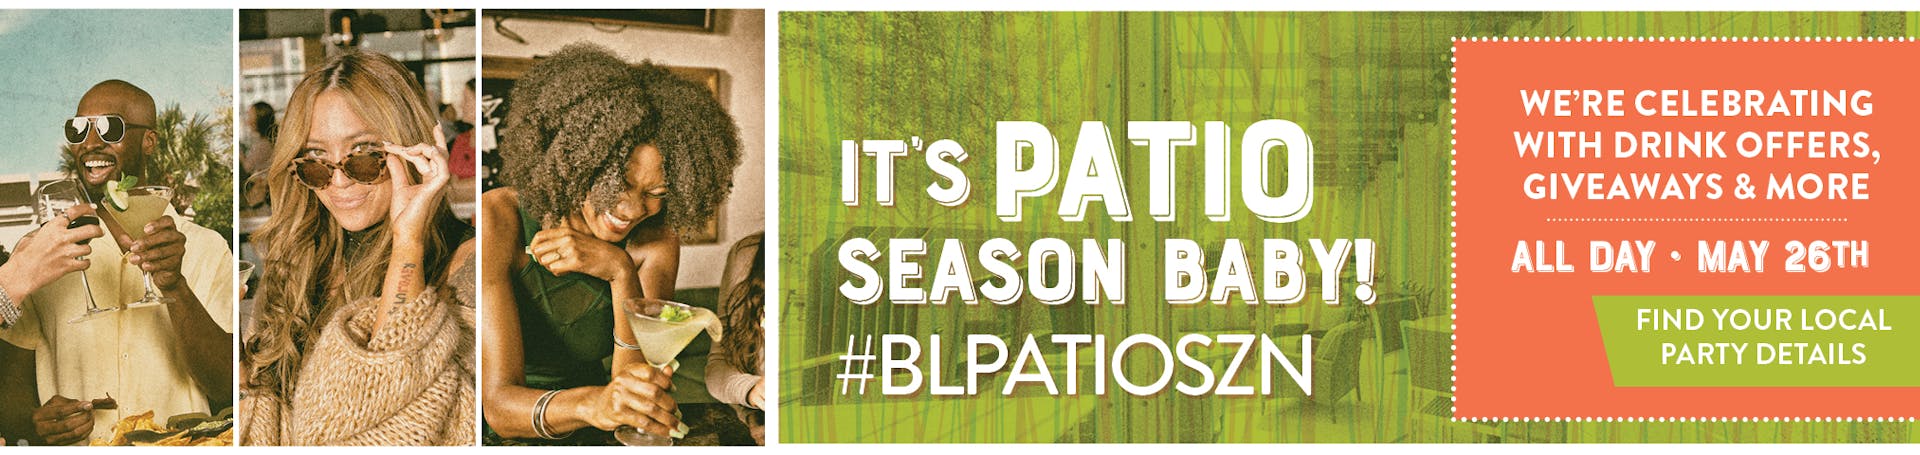 It's Patio season baby! #BLPATIOSZN - We're celebrating with drink offers, giveaways 7 more All Day May 26th. Find your local party details